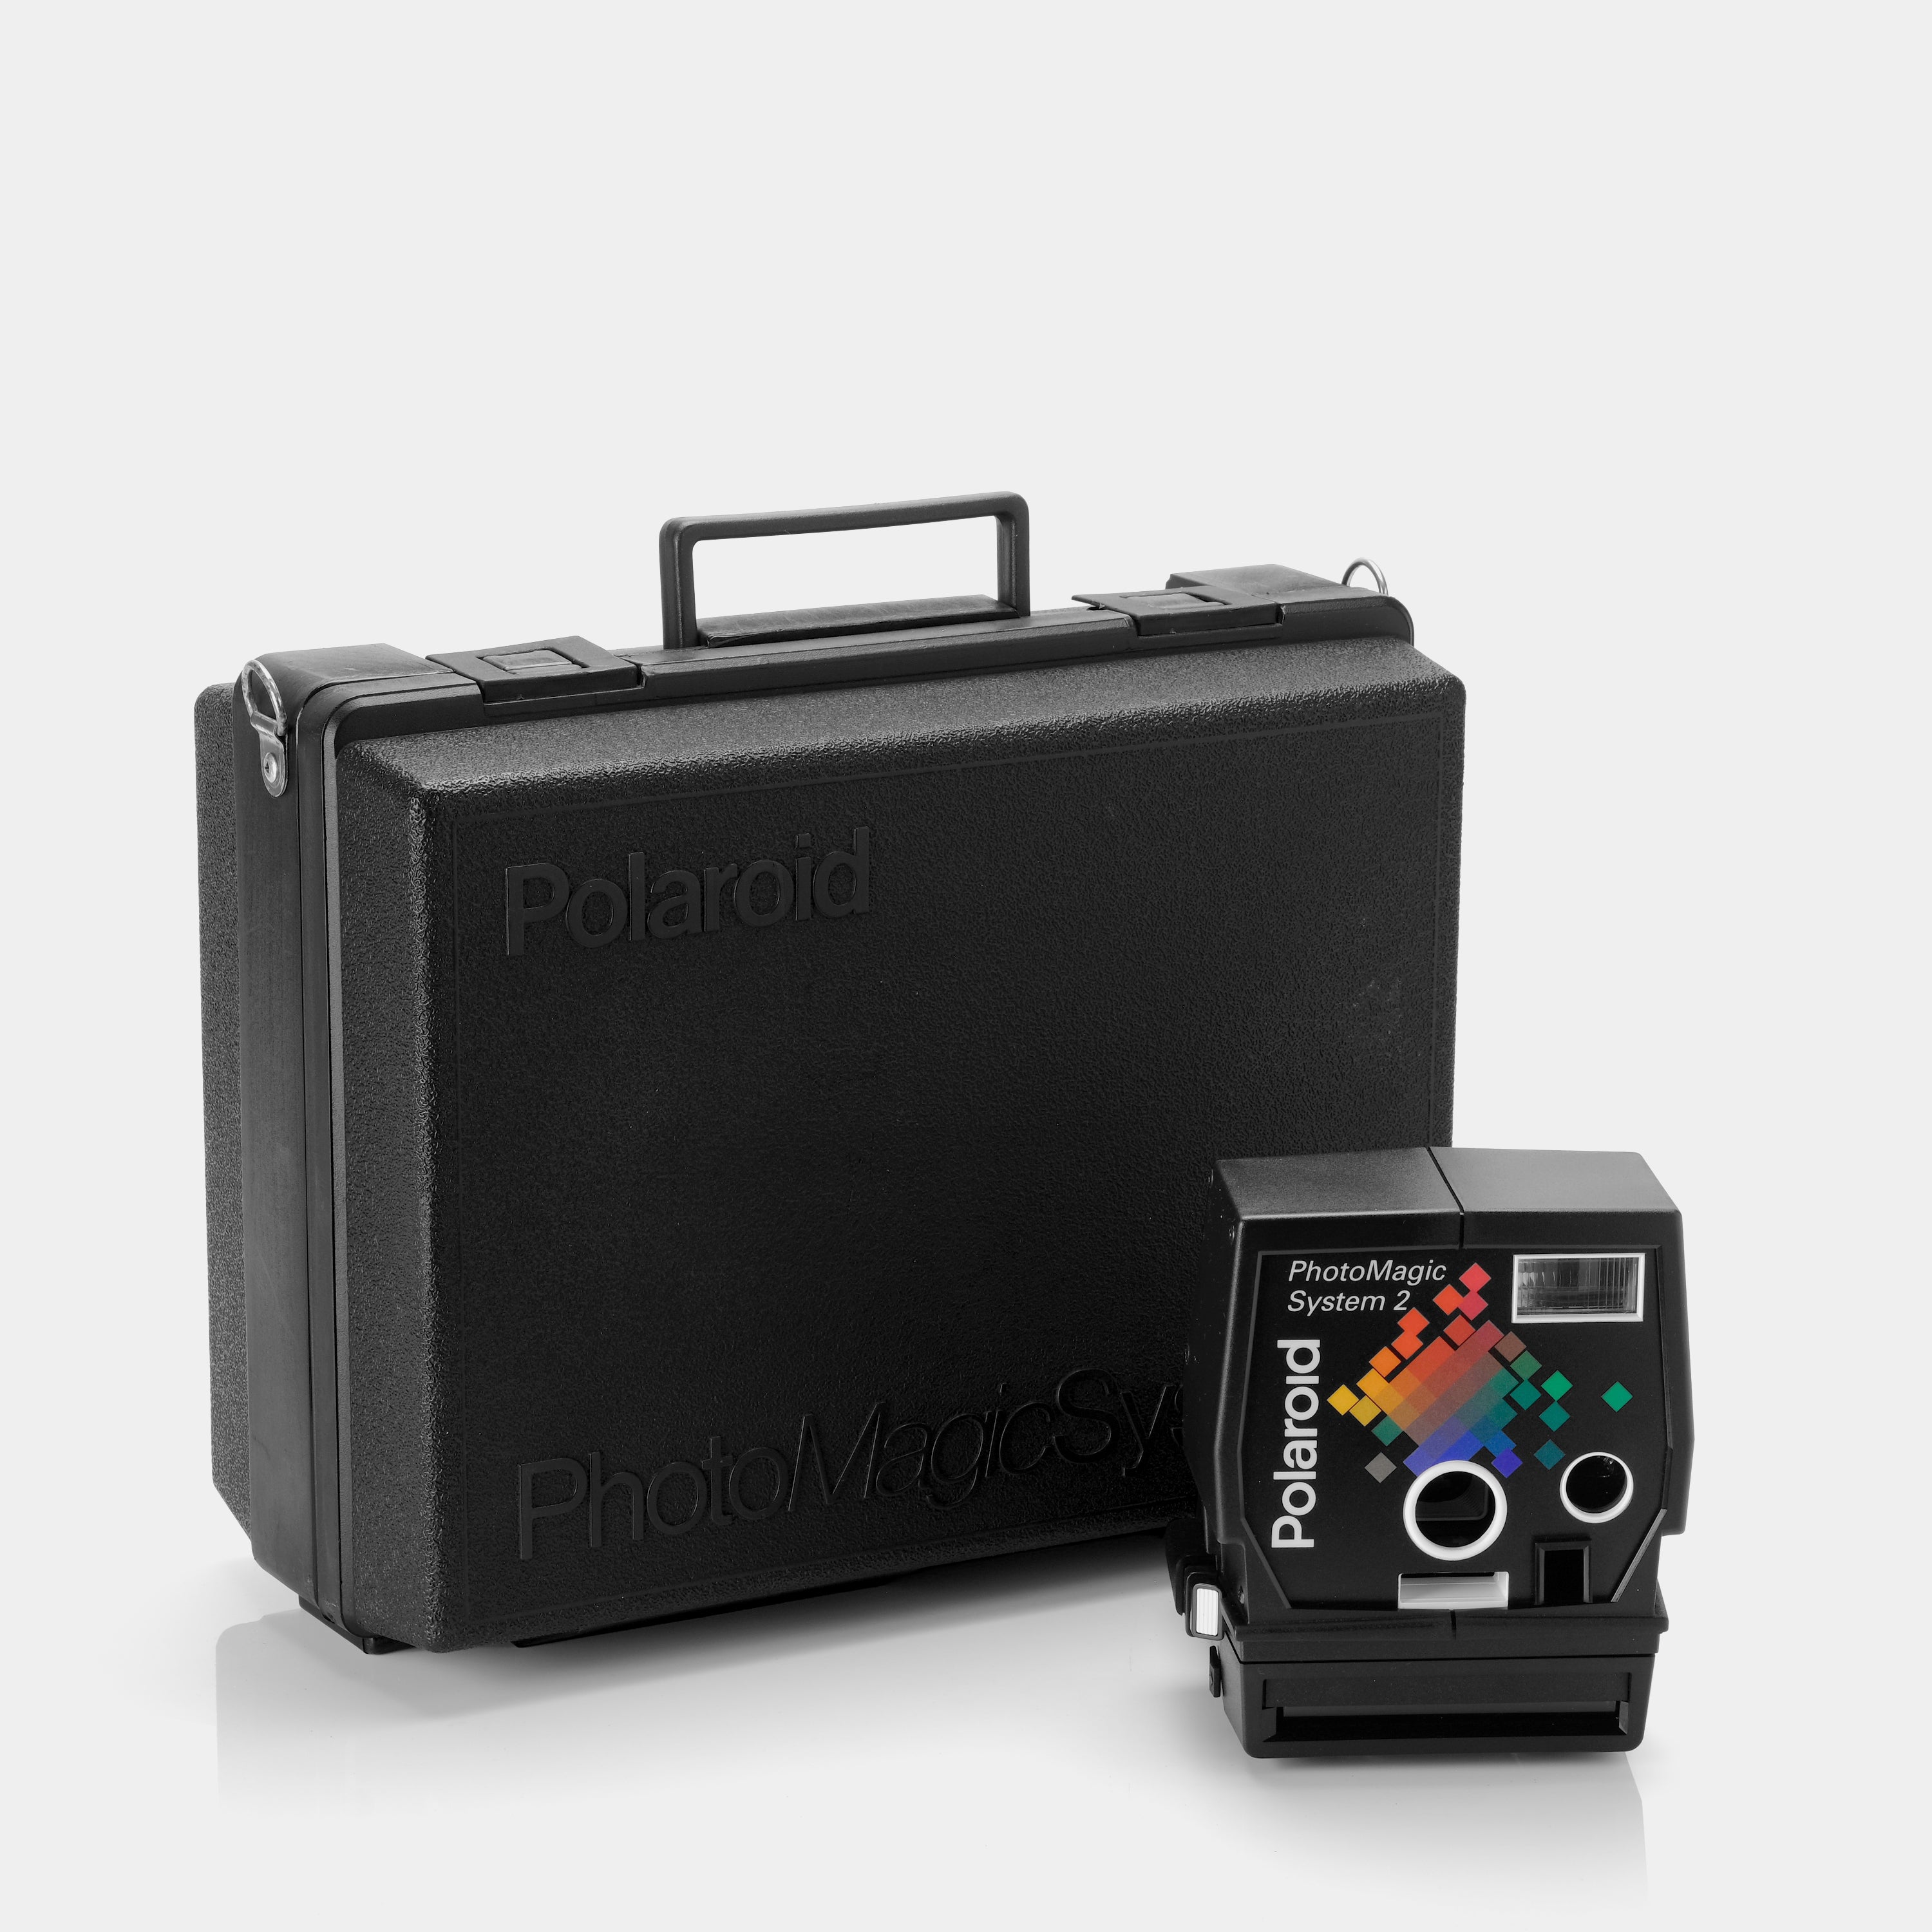 Polaroid Photo Magic System 2 Instant Film Camera With Case and Accessories